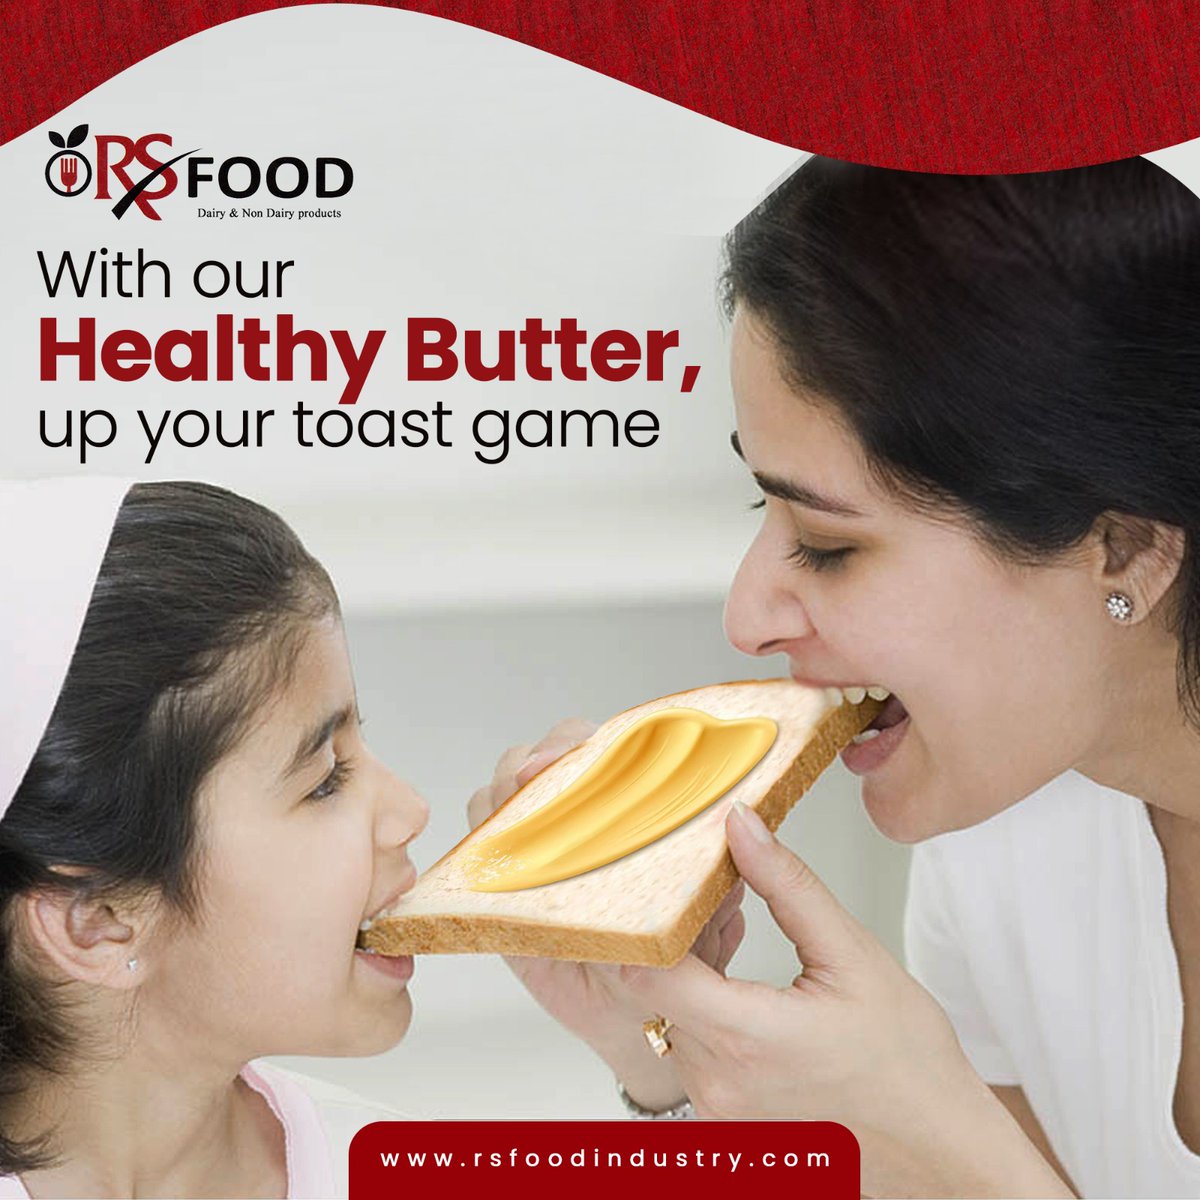 With our Healthy Butter, up your toast game

#RSFood #RSbutter #RSdesighee #ButterLove #HealthyButter #HealthyEating #ButterObsessed #ButterIsBetter #SpreadTheLove #ButterLover #ButterAddict #ButterMakesEverythingBetter #ButterLife #ButterGoesWithEverything #Butterlicious